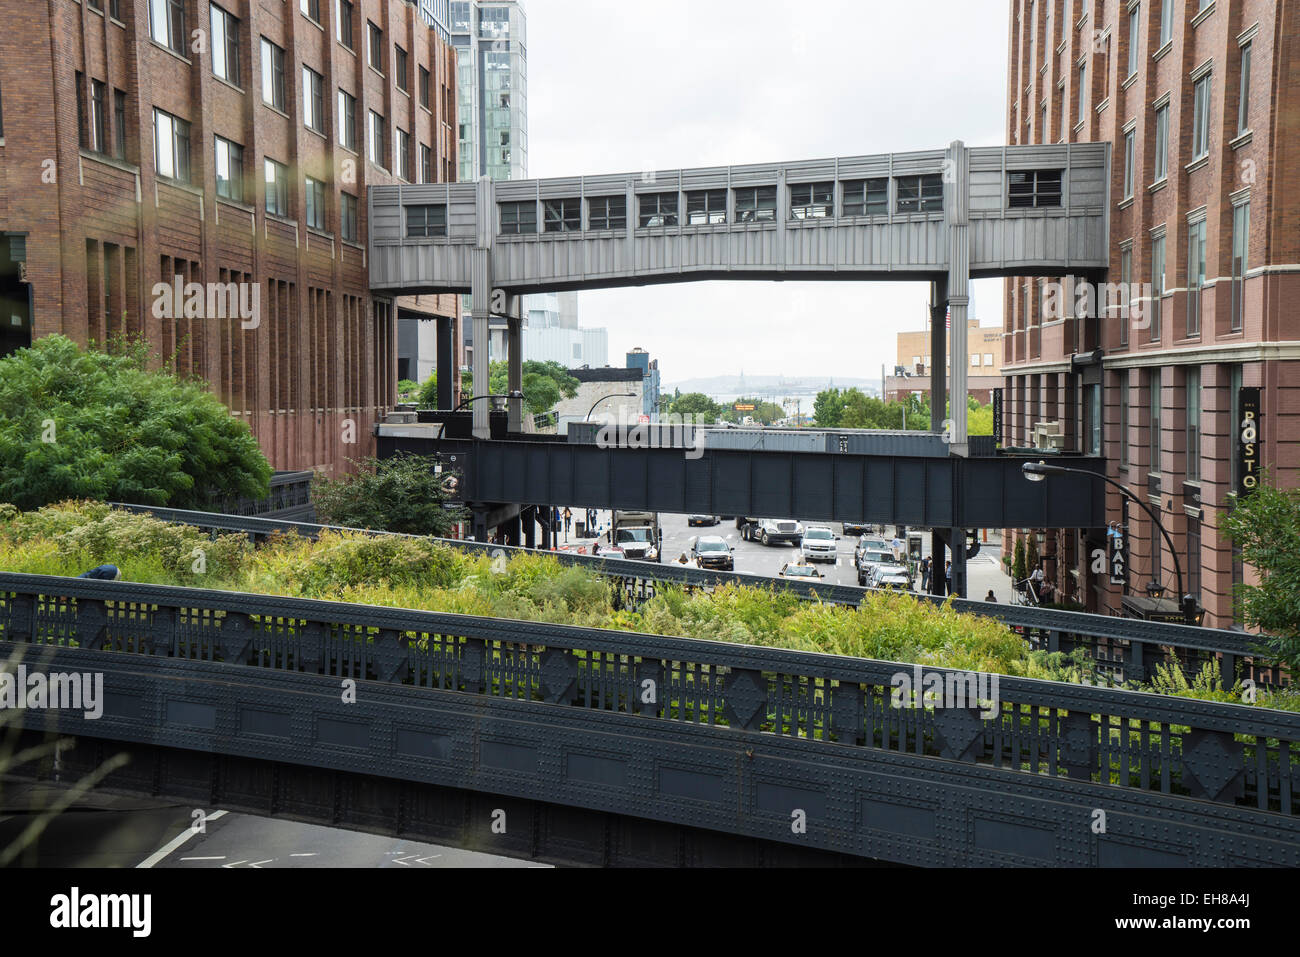 High Line public park, Meatpacking District, New York City, New York, United States of America, North America Stock Photo